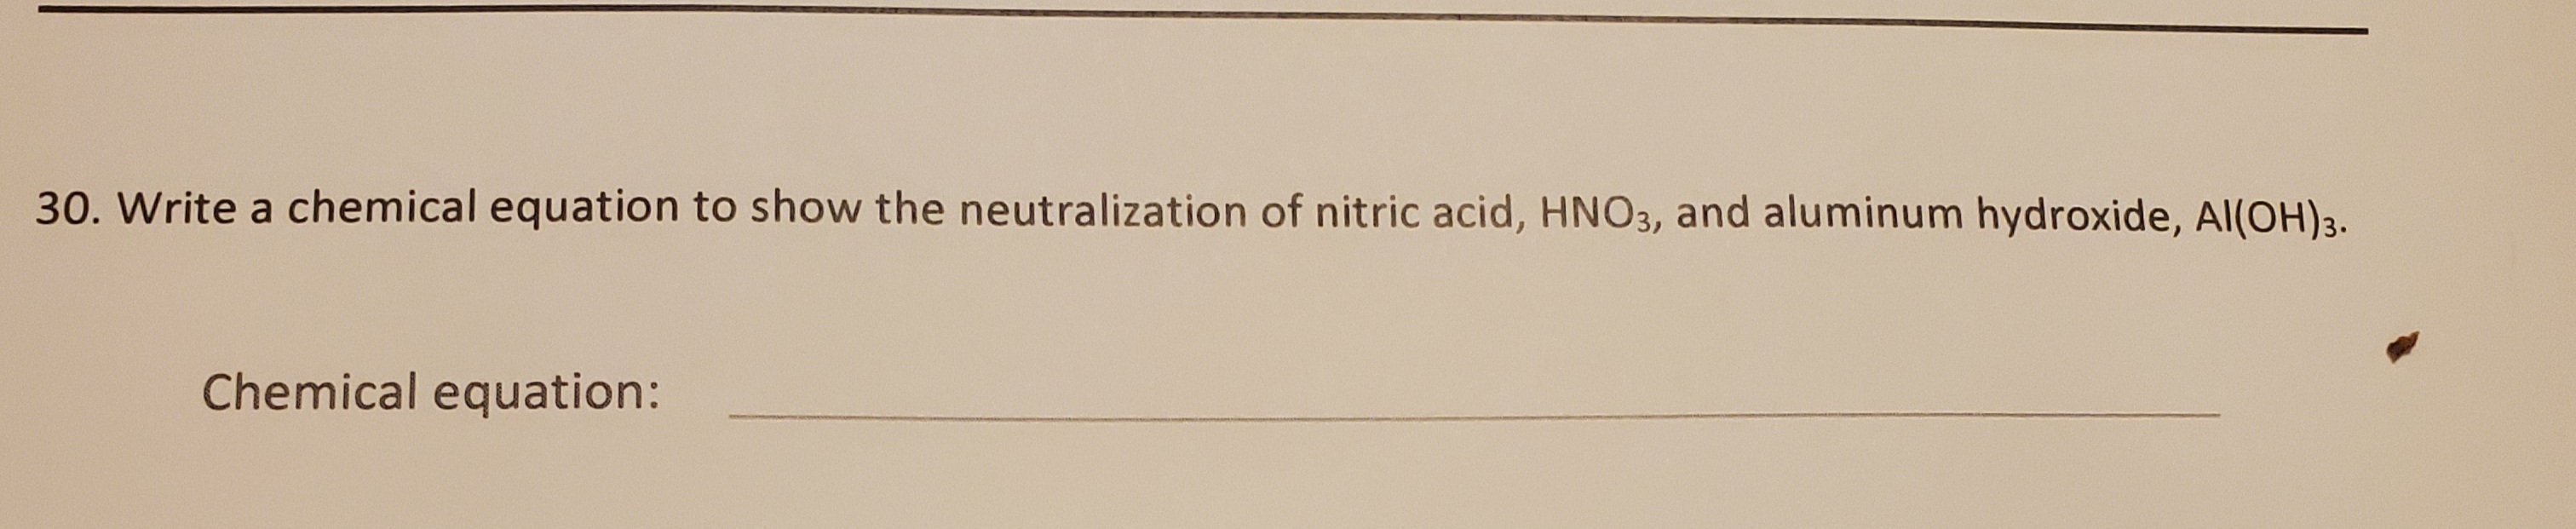 30. Write a chemical equation to show the neutralization of nitric acid, HNO3, and aluminum hydroxide, Al(OH)3.
Chemical equation:
